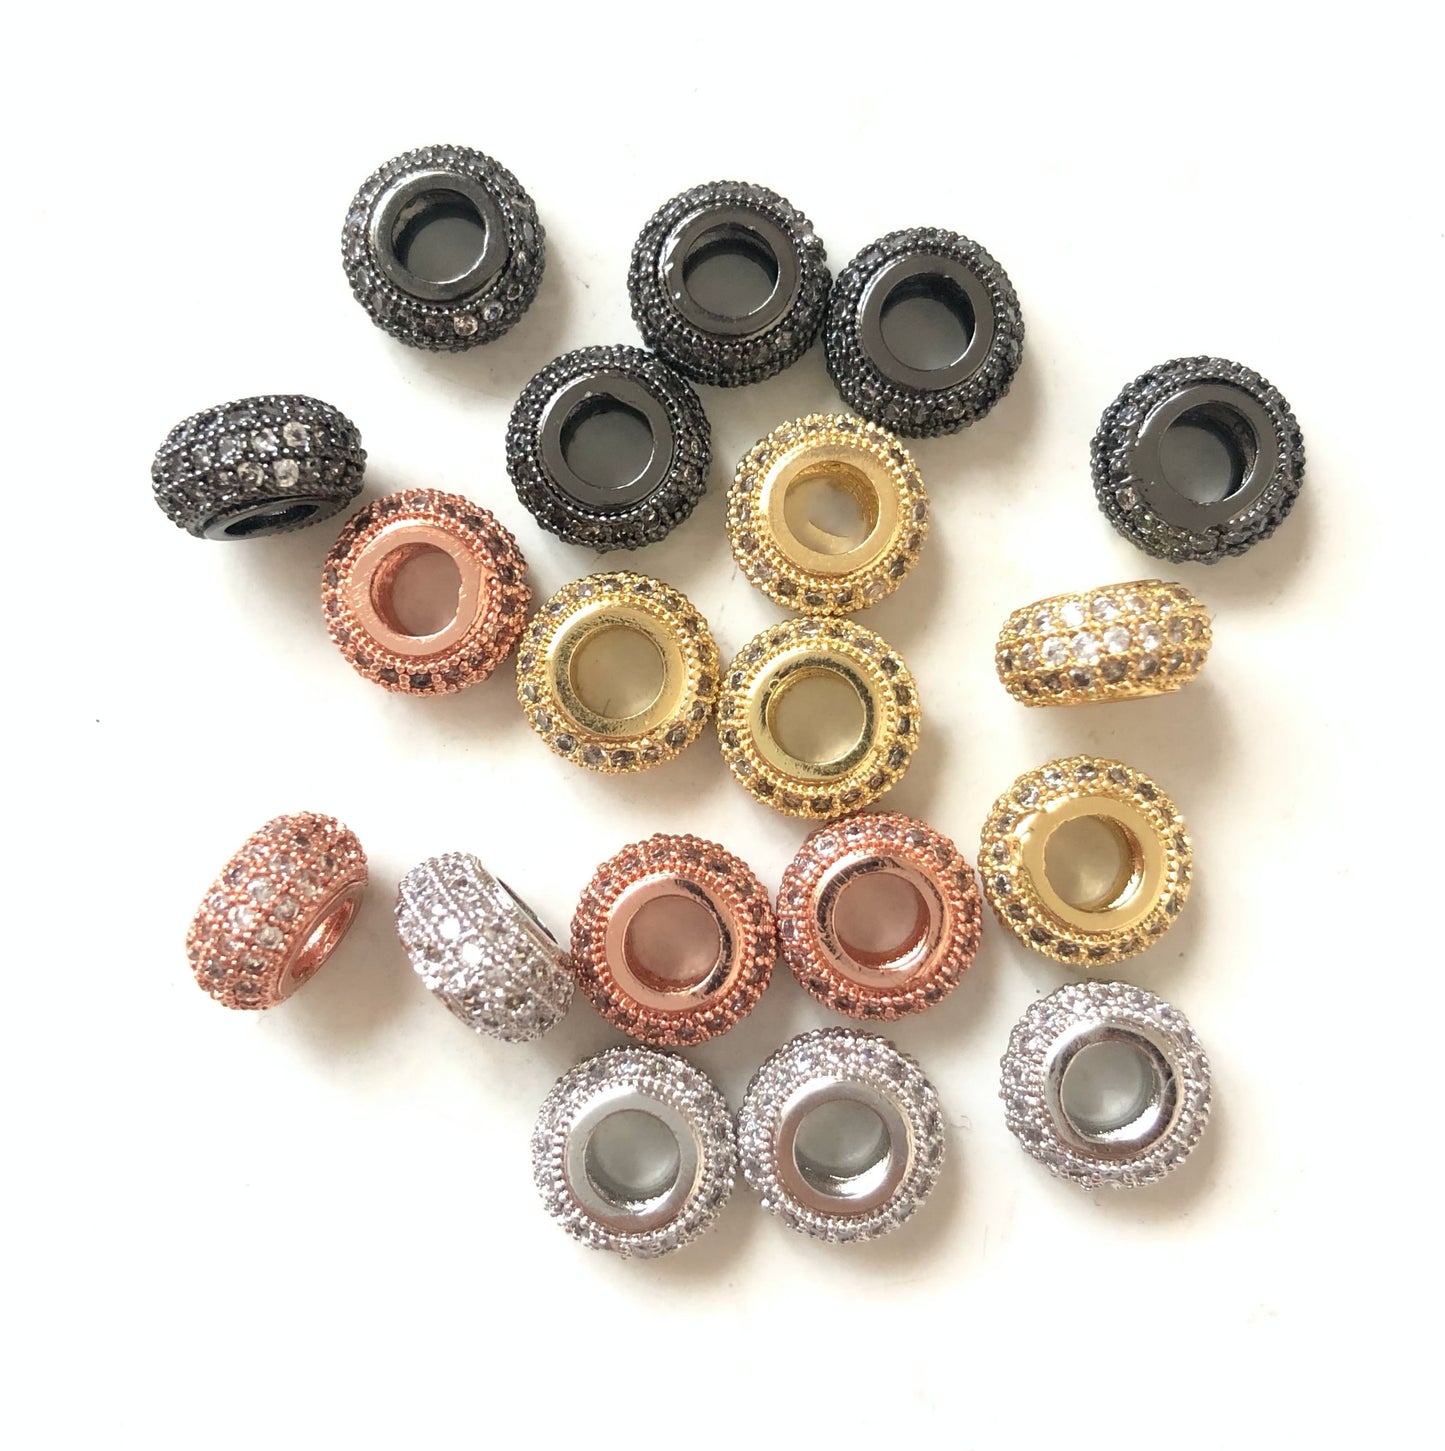 20pcs/lot 8.6*4.9mm Clear CZ Paved Wheel Rondelle Spacers Mix Color CZ Paved Spacers Rondelle Beads Charms Beads Beyond